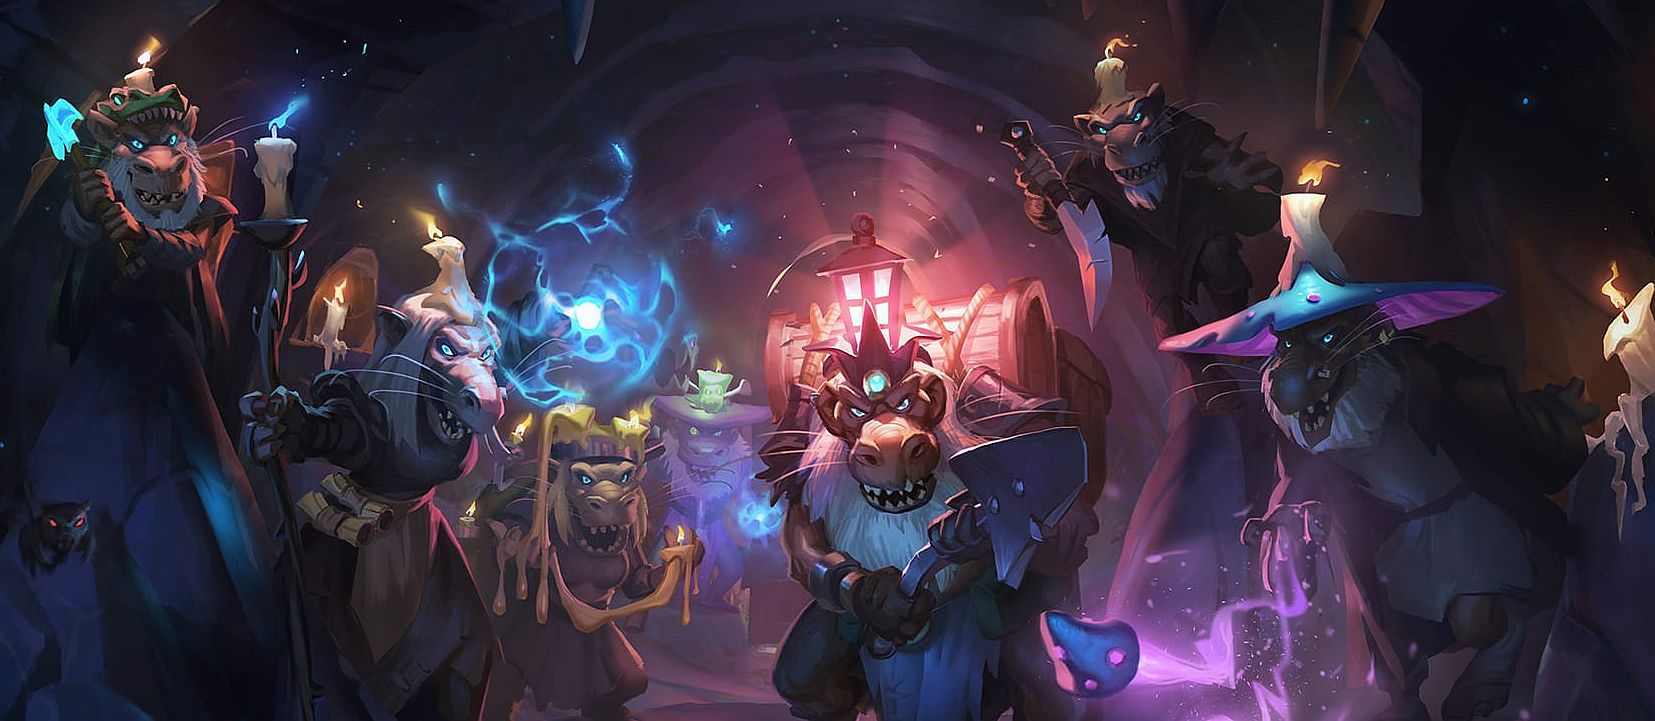 Image for Hearthstone players will go on Dungeon Runs when Kobolds and Catacombs releases in December